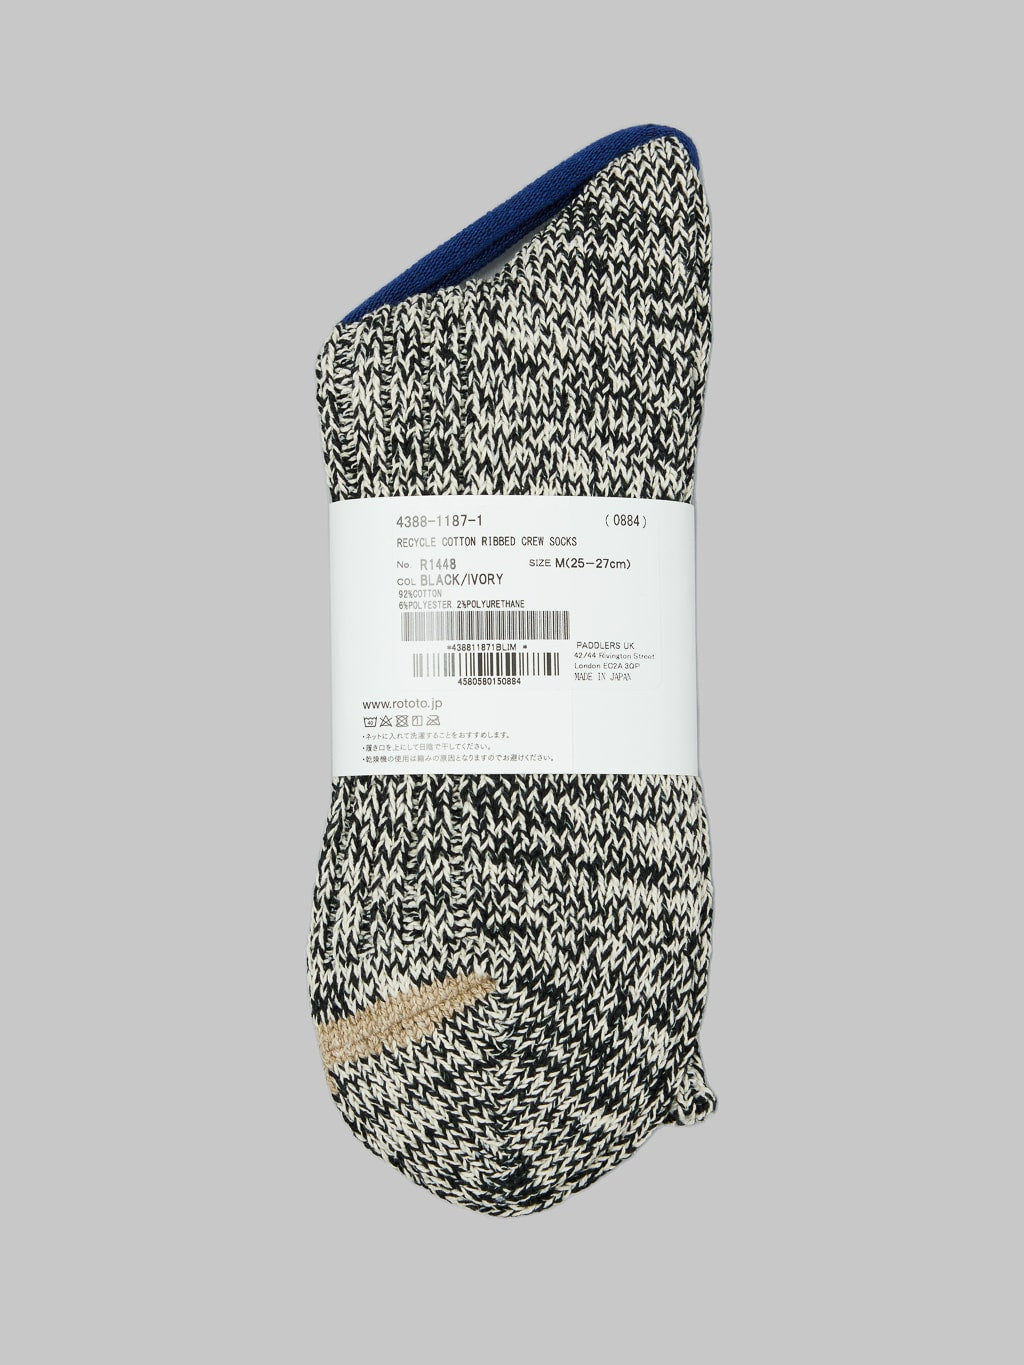 rototo recycle cotton ribbed crew socks black ivory back label details